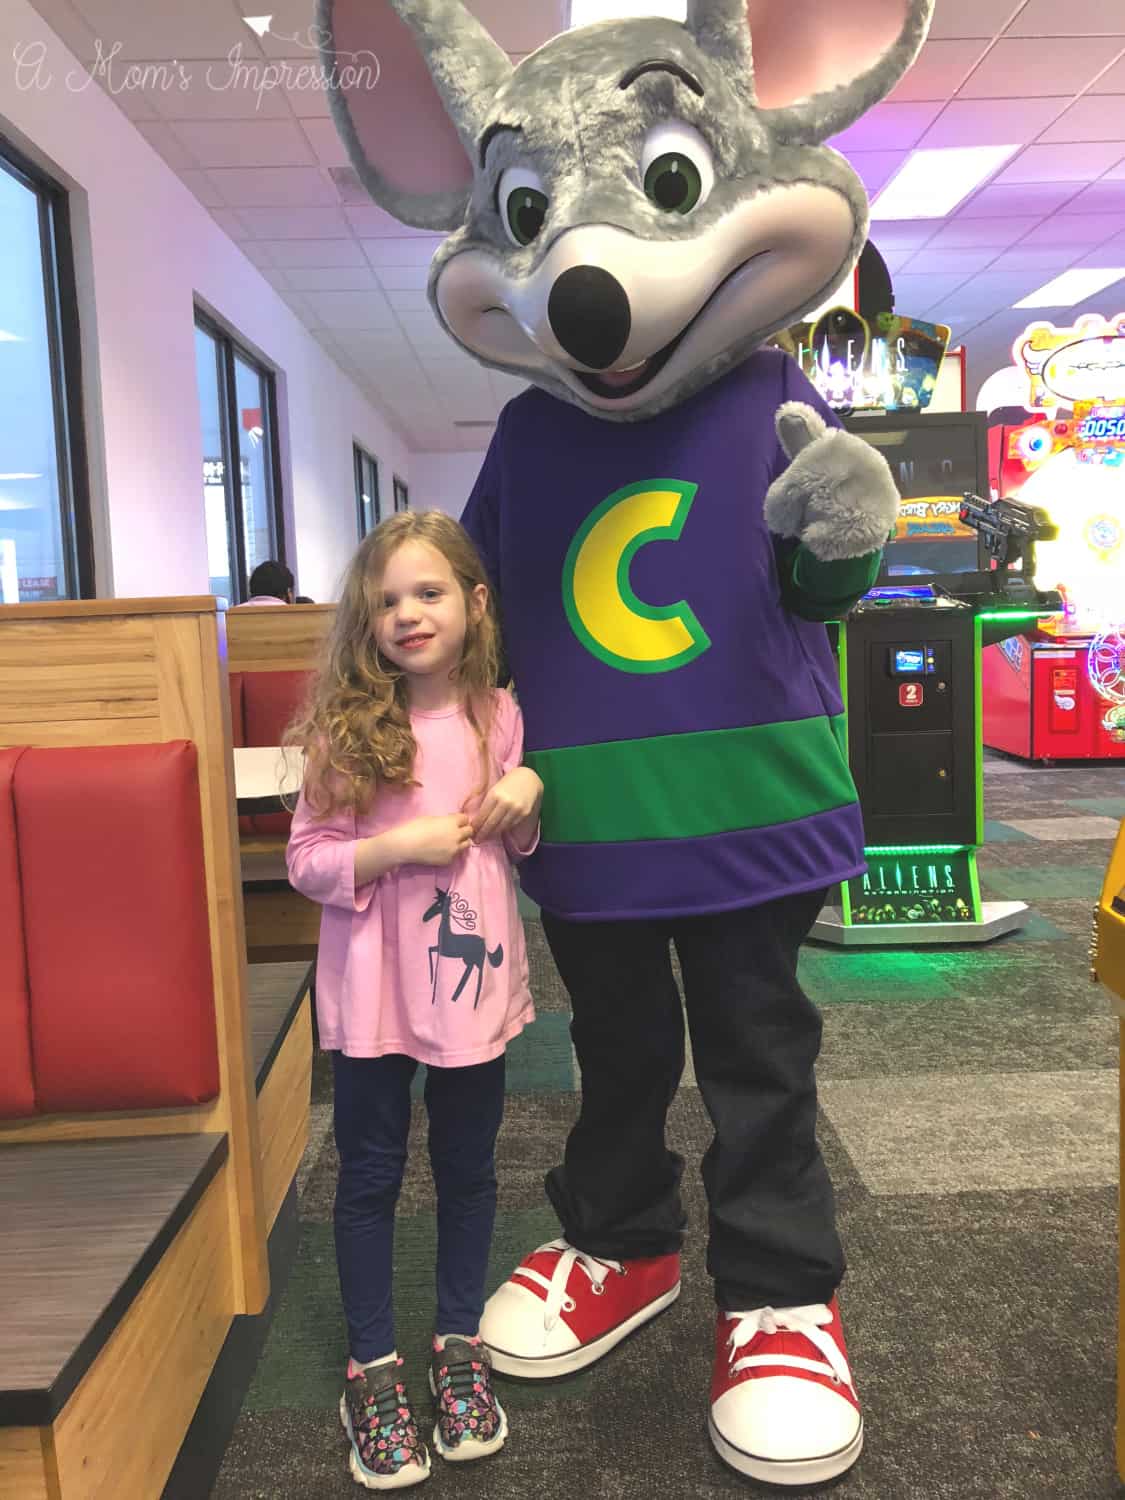 A young girl with Chuck E. Cheese